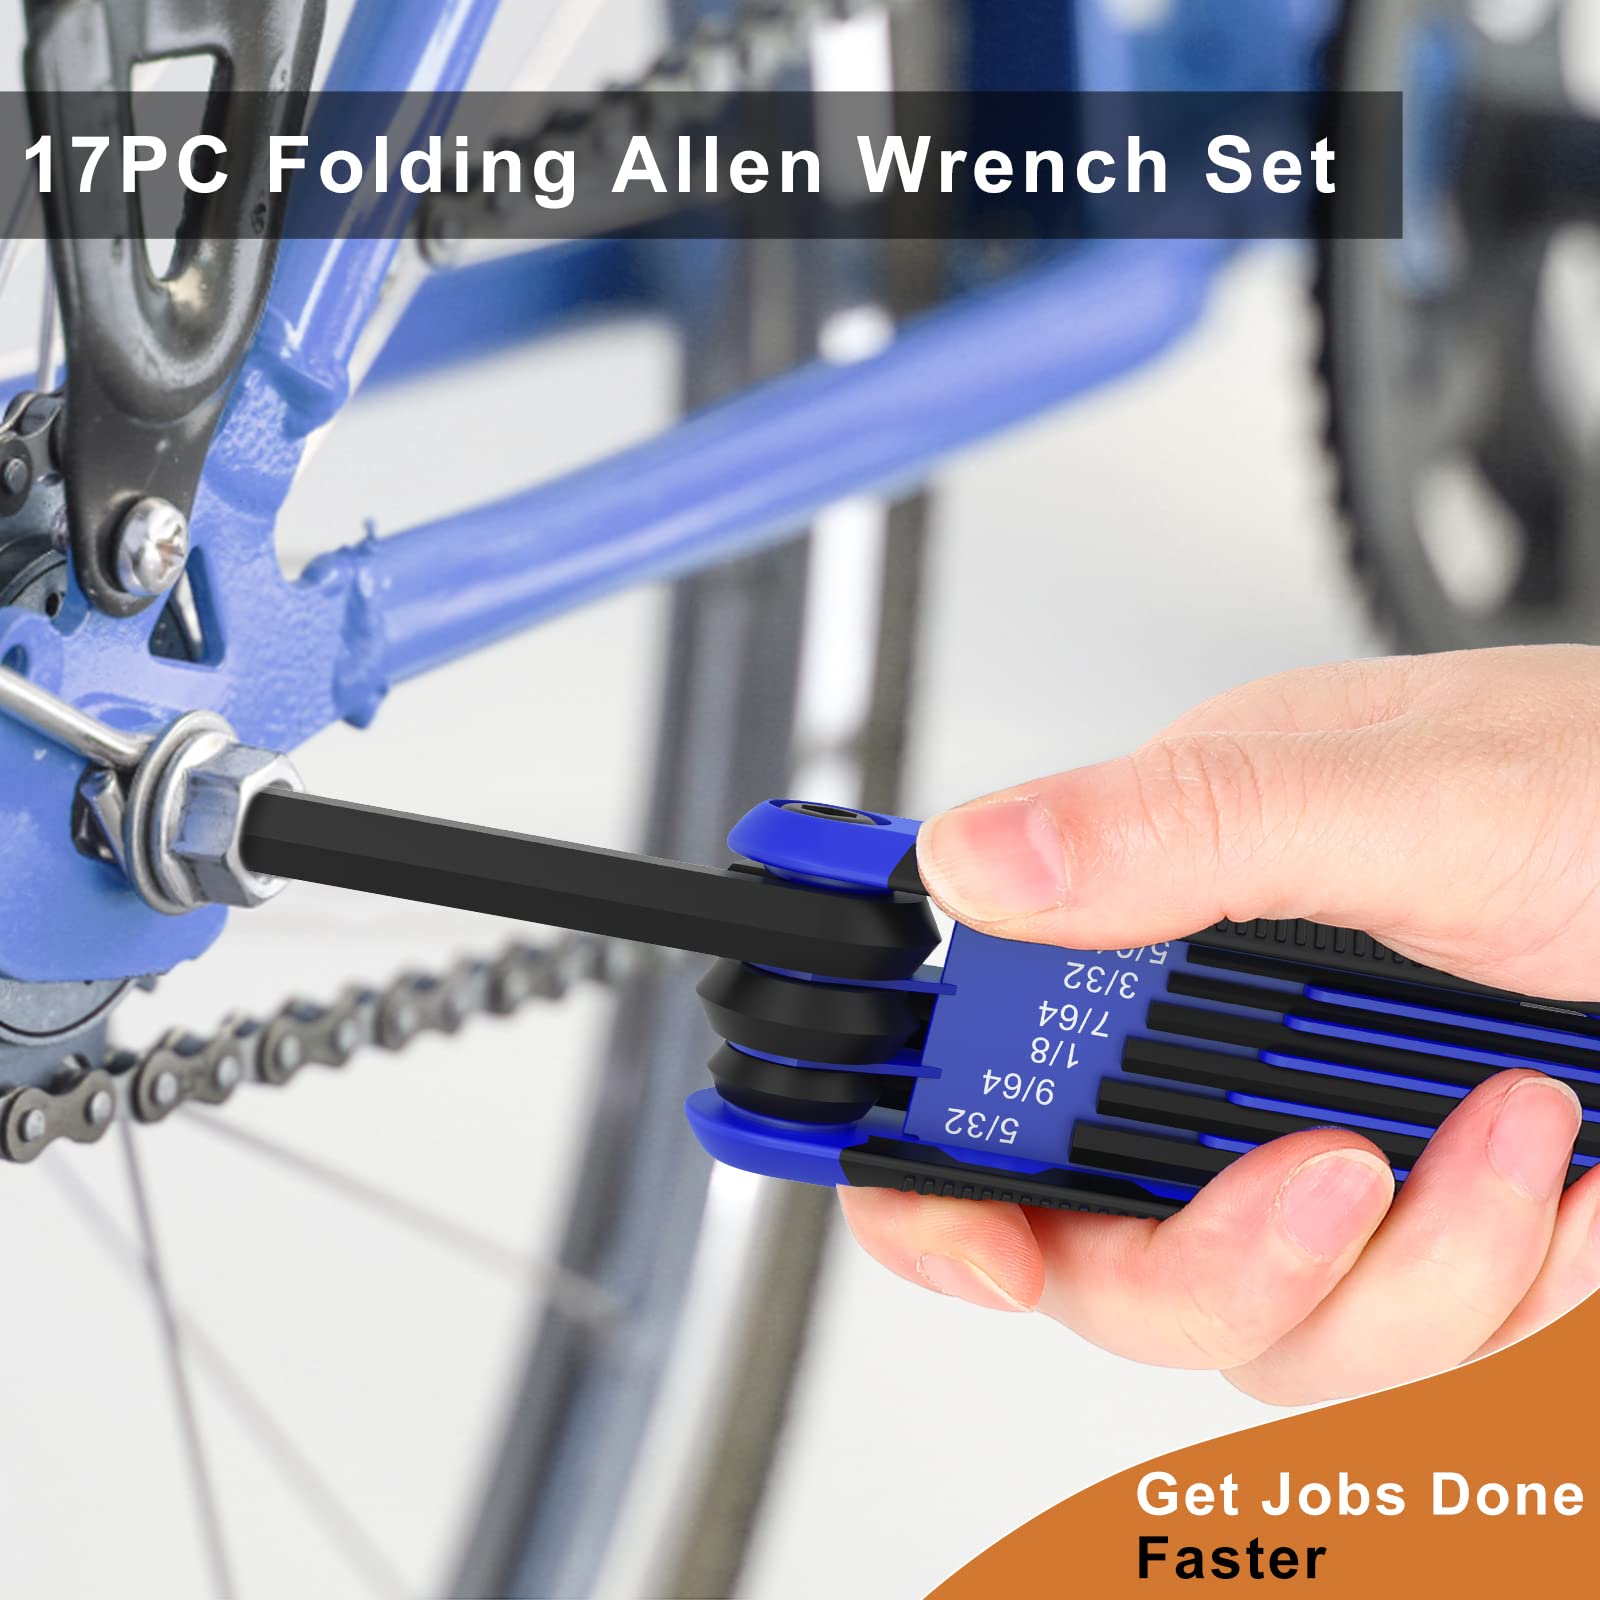 Allen Wrenches Sets - 17Pcs Hex Key Set Metric & Standard SAE Folding Allen Key Sets | 2 Pack Portable Small Allen Wrenches Sets for Hex Head Socket Screw, Stocking Stuffers, Unique Gifts For Men